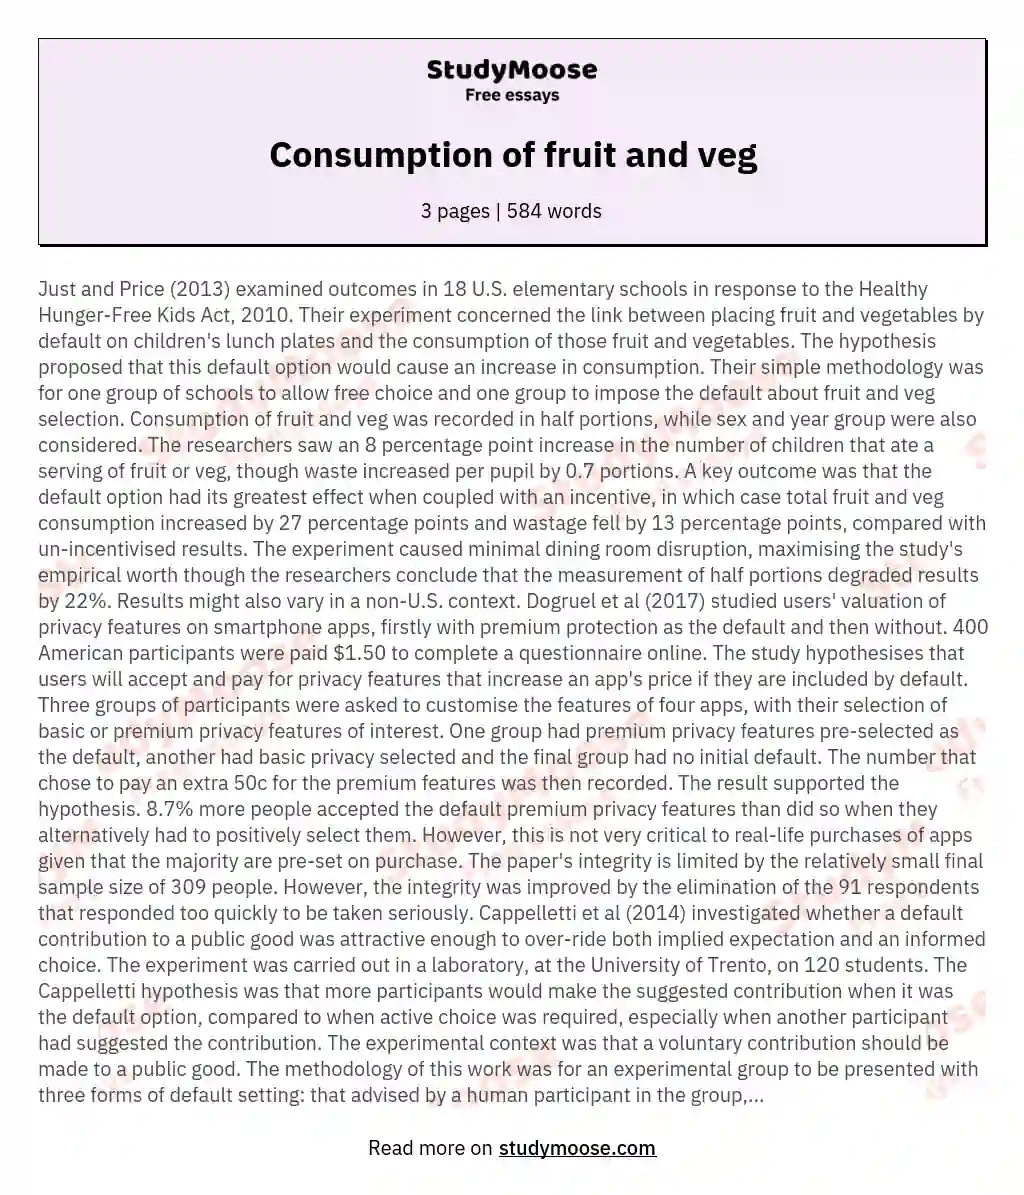 Consumption of fruit and veg essay